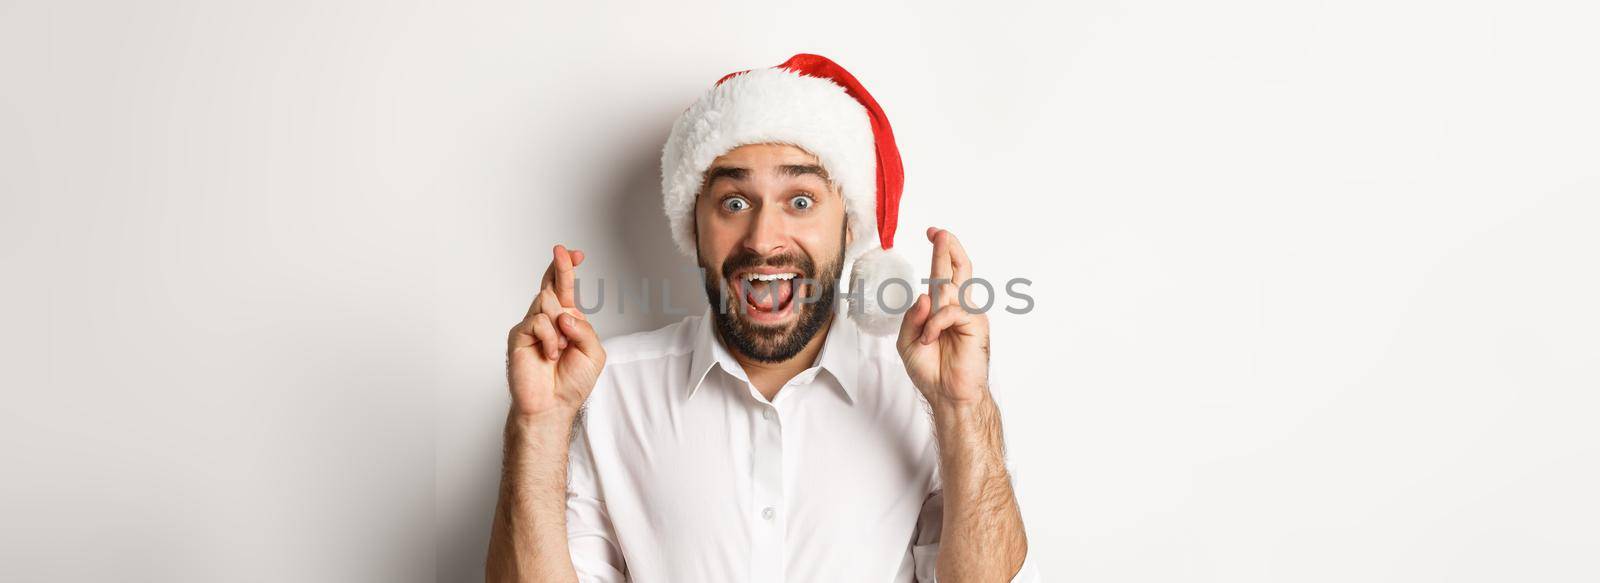 Party, winter holidays and celebration concept. Happy man in santa hat making christmas wish, cross fingers for good luck and looking excited, white background.